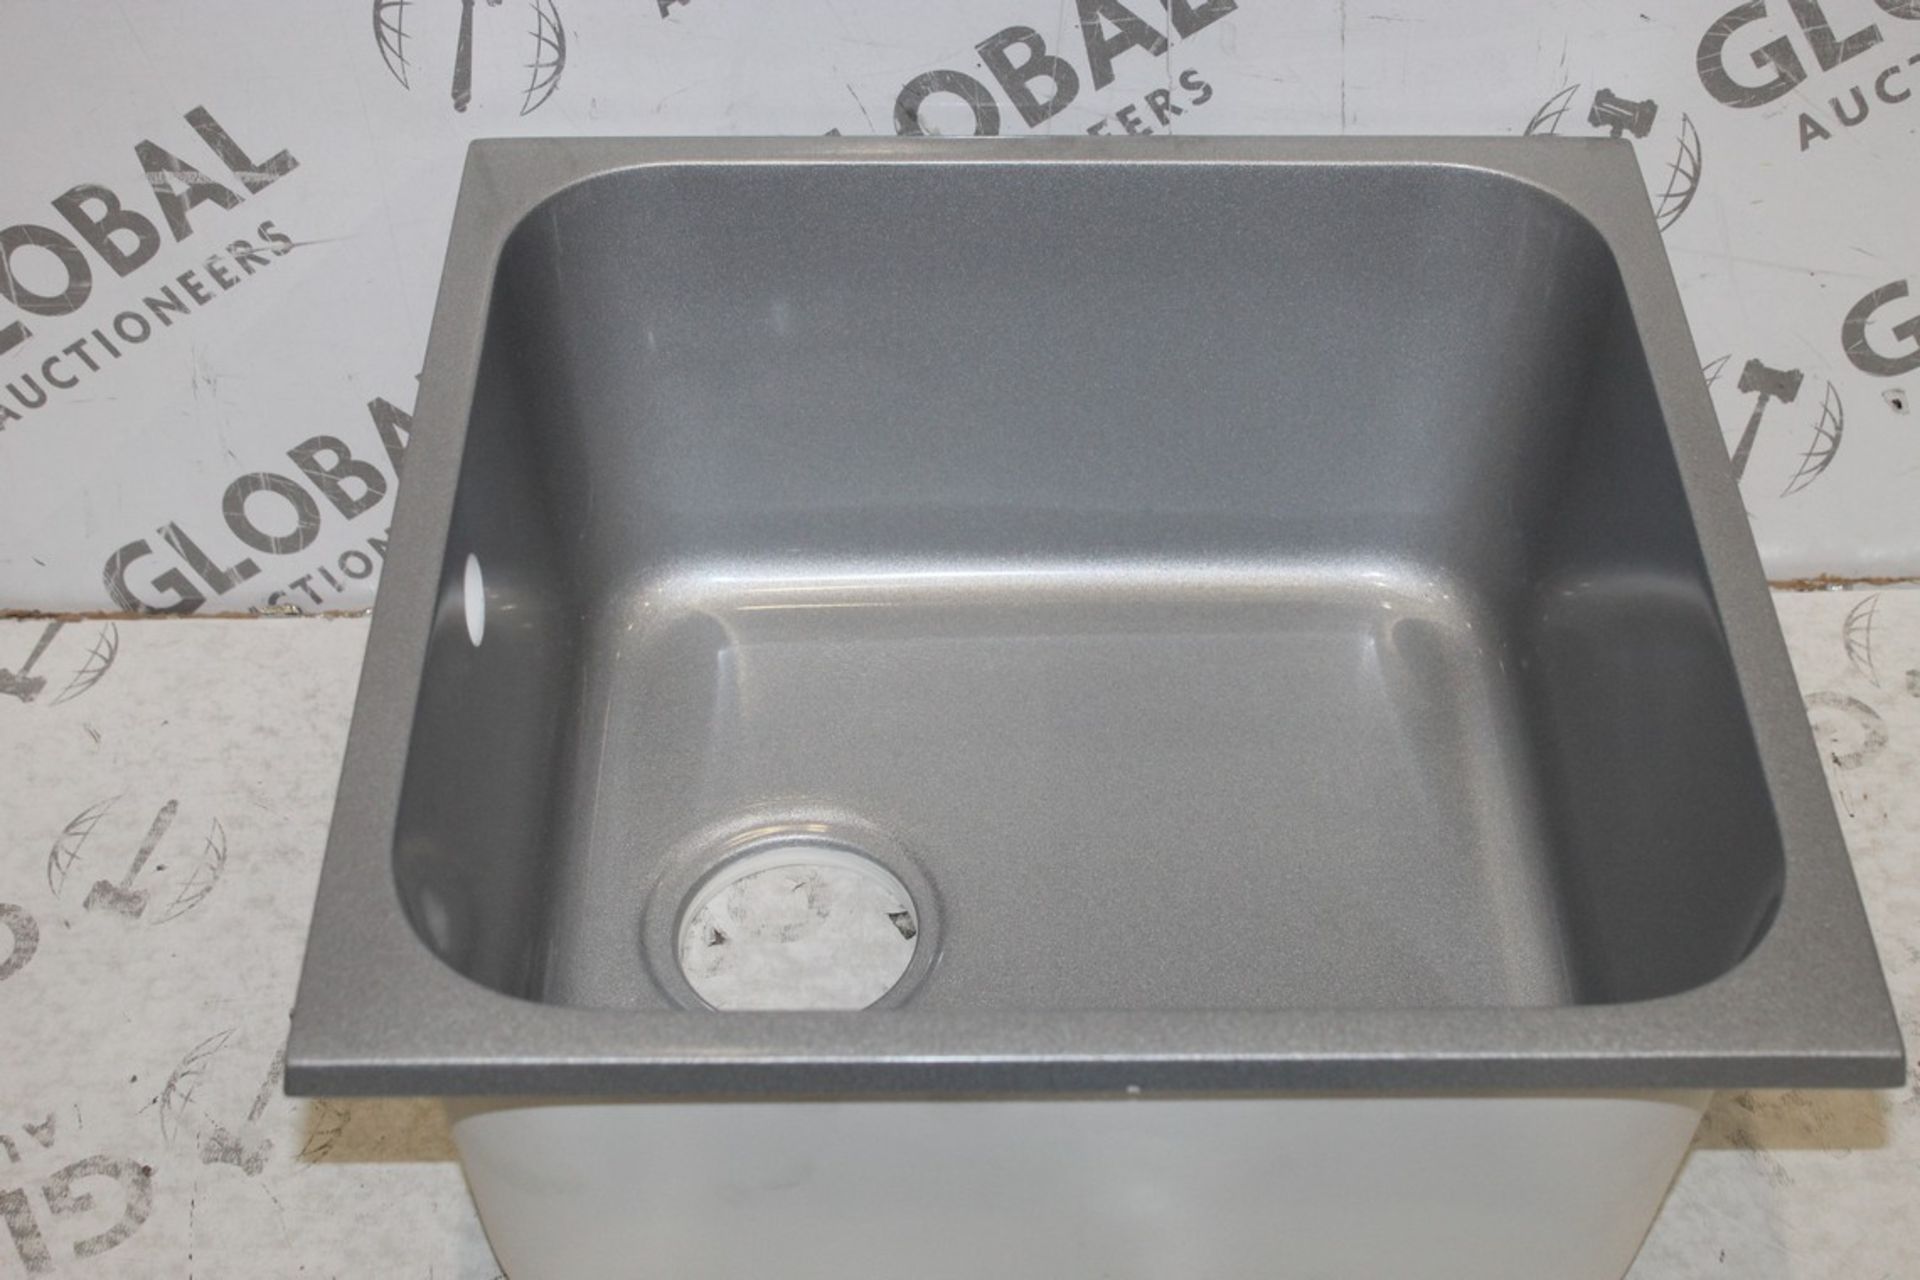 Boxed Gandia 40 Sink Basin RRP £200 (Appraisals Are Available Upon Request)(Pictures Are For